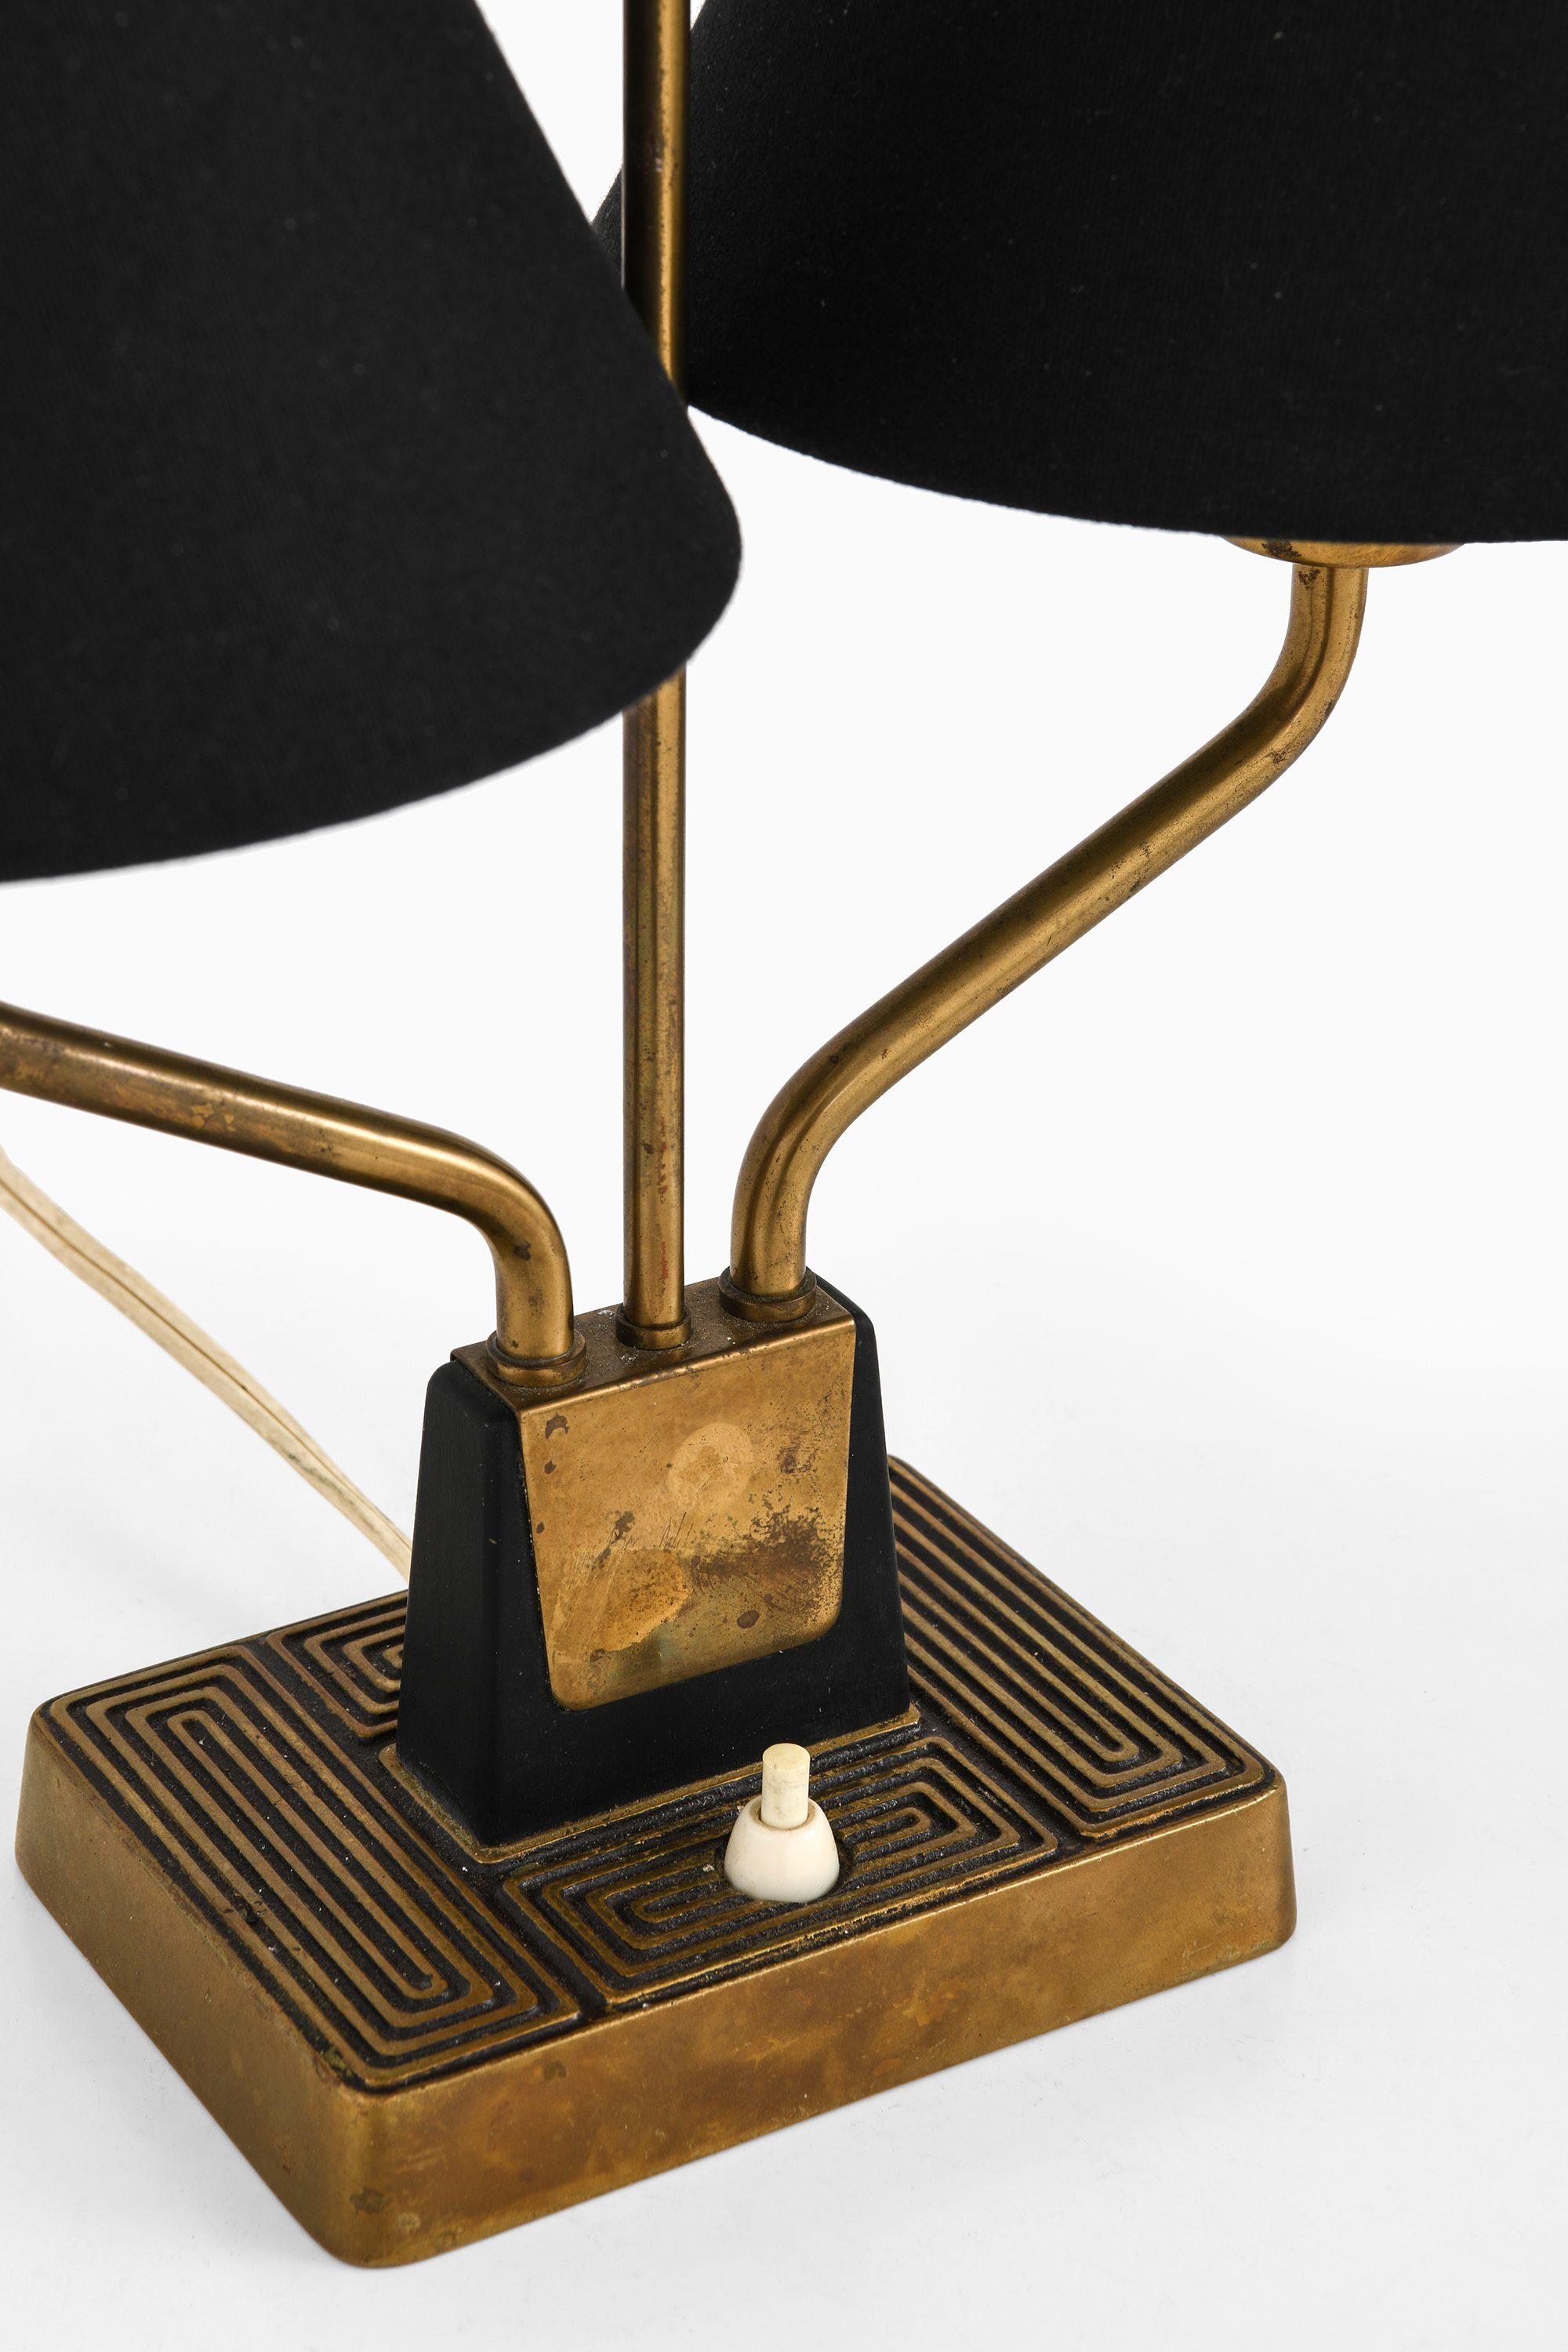 Table Lamp in Brass and Black Fabric Lamp Shades by Sonja Katzin, 1950's

Additional Information:
Material: Brass and black fabric lamp shades
Style: Mid century, Scandinavian
Produced by ASEA in Sweden
Dimensions (W x D x H): 42 x 20 x 42